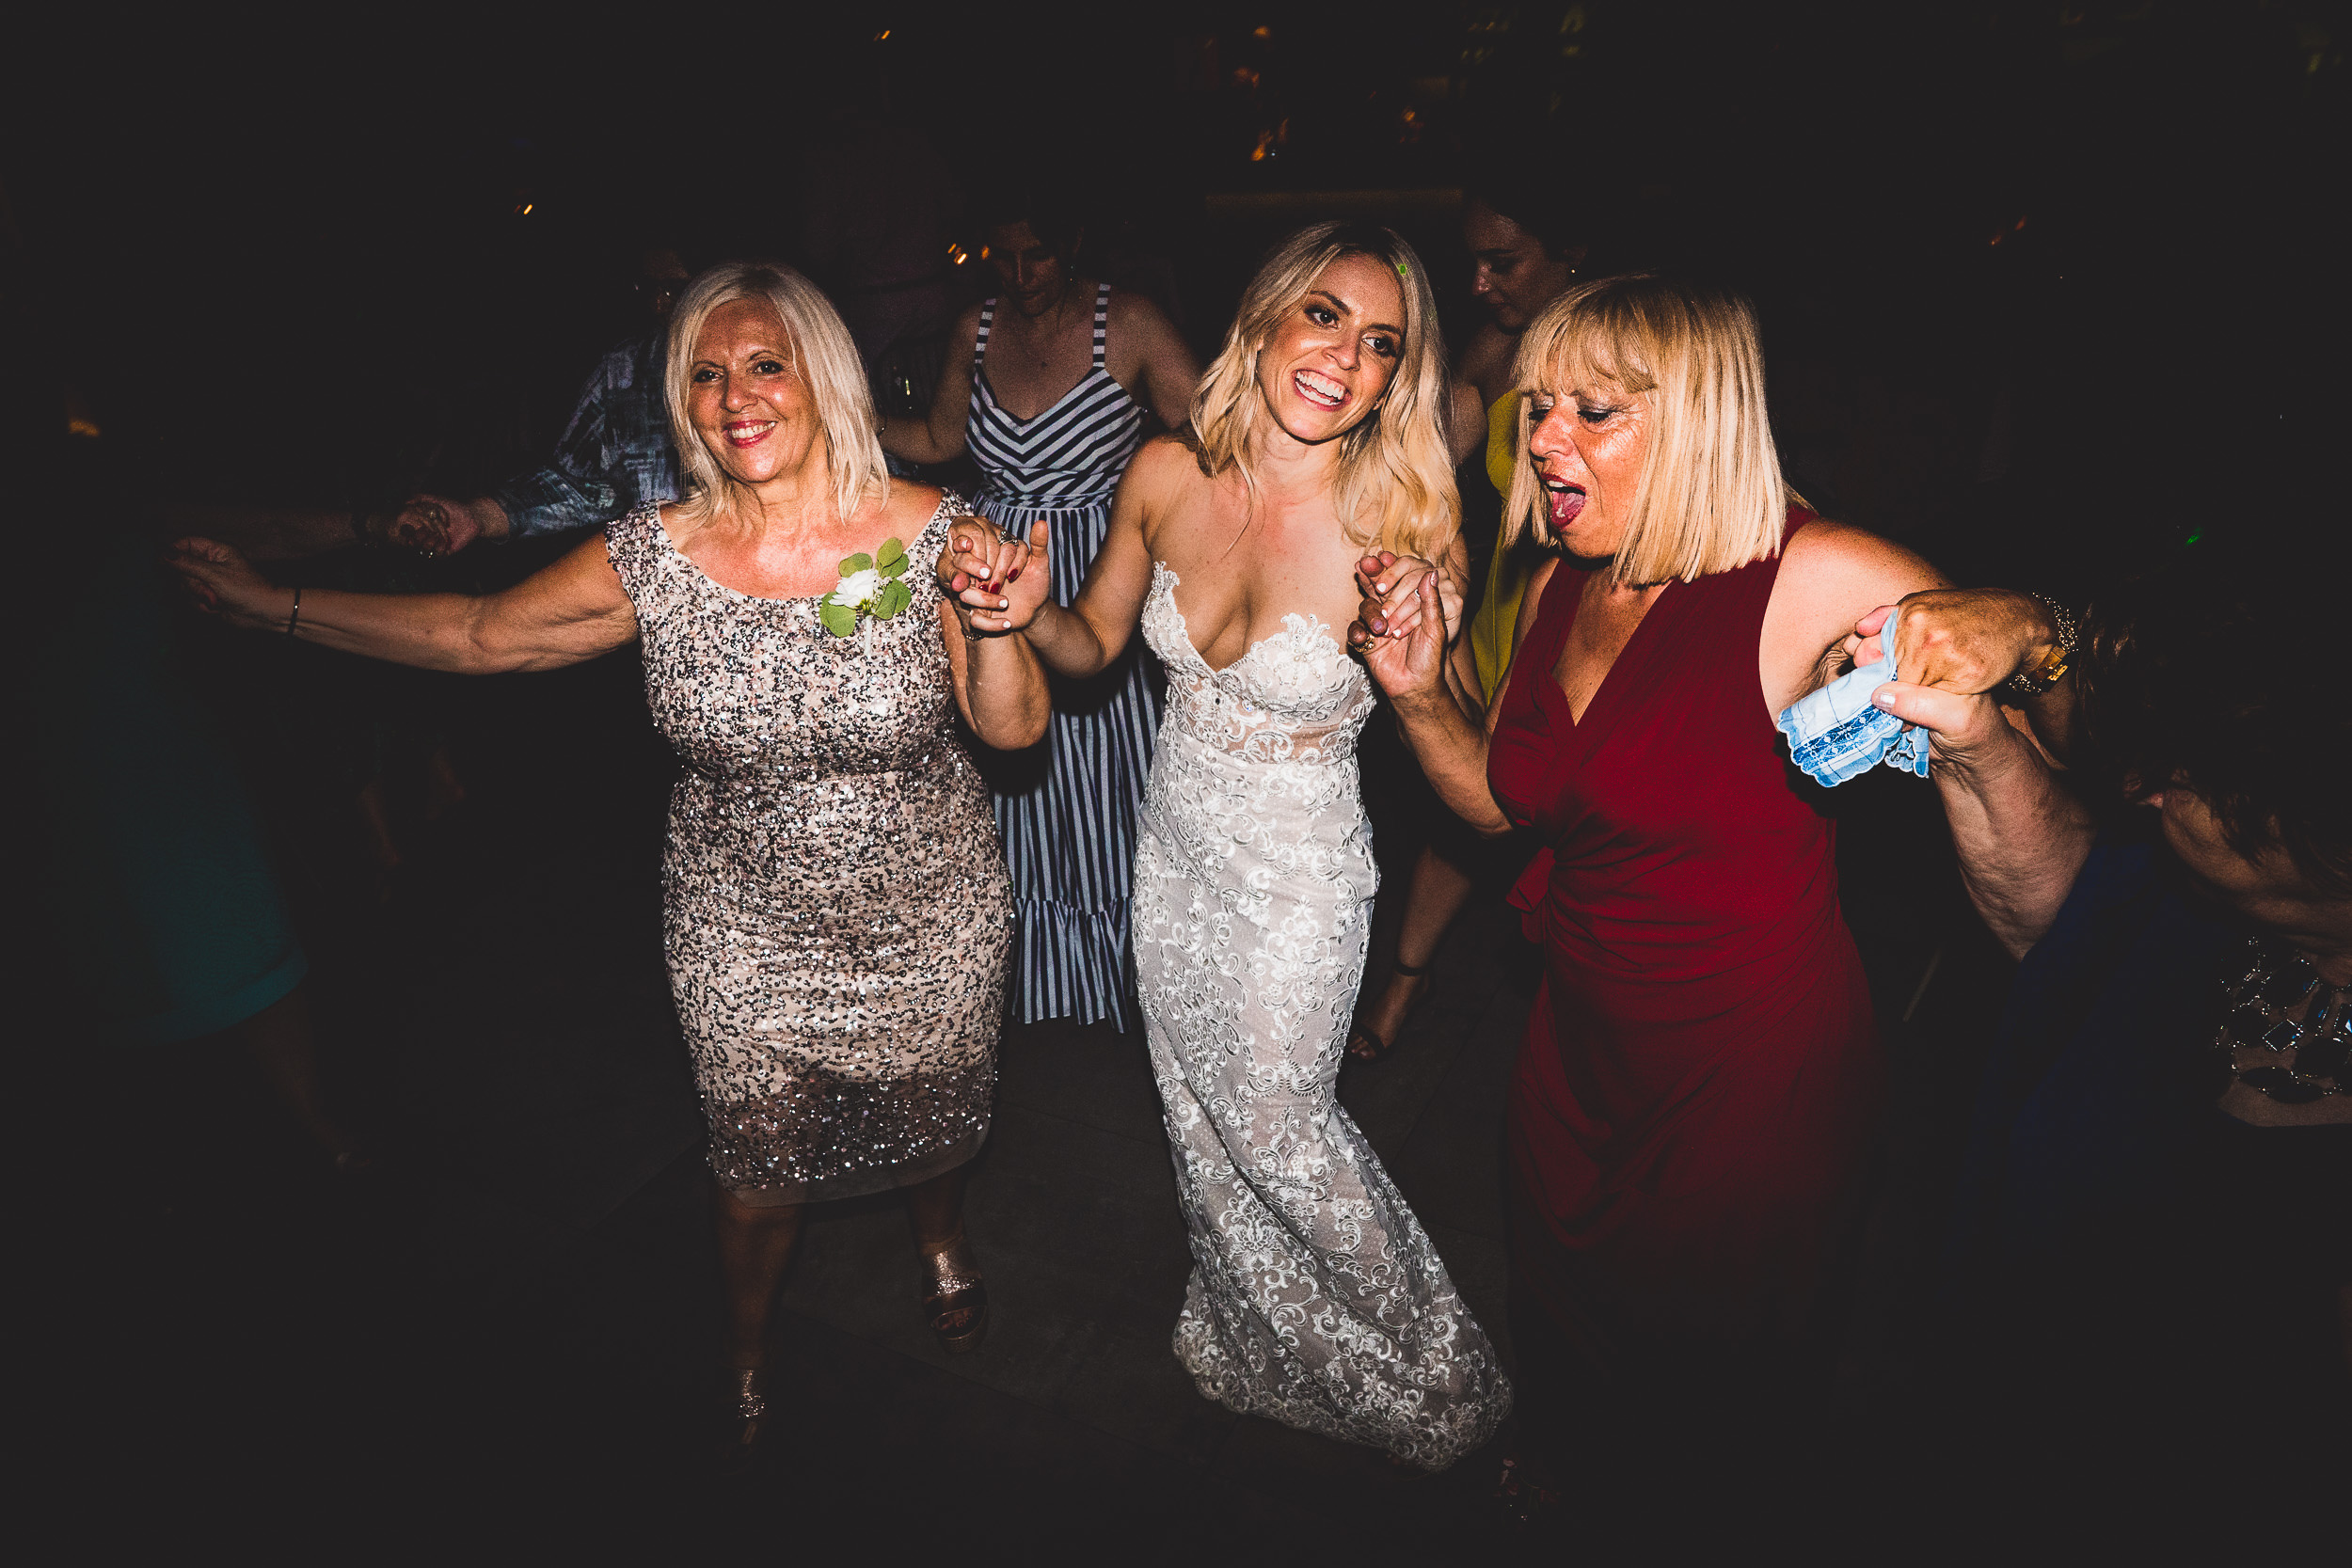 A group of women dancing at a wedding reception captured by a wedding photographer.